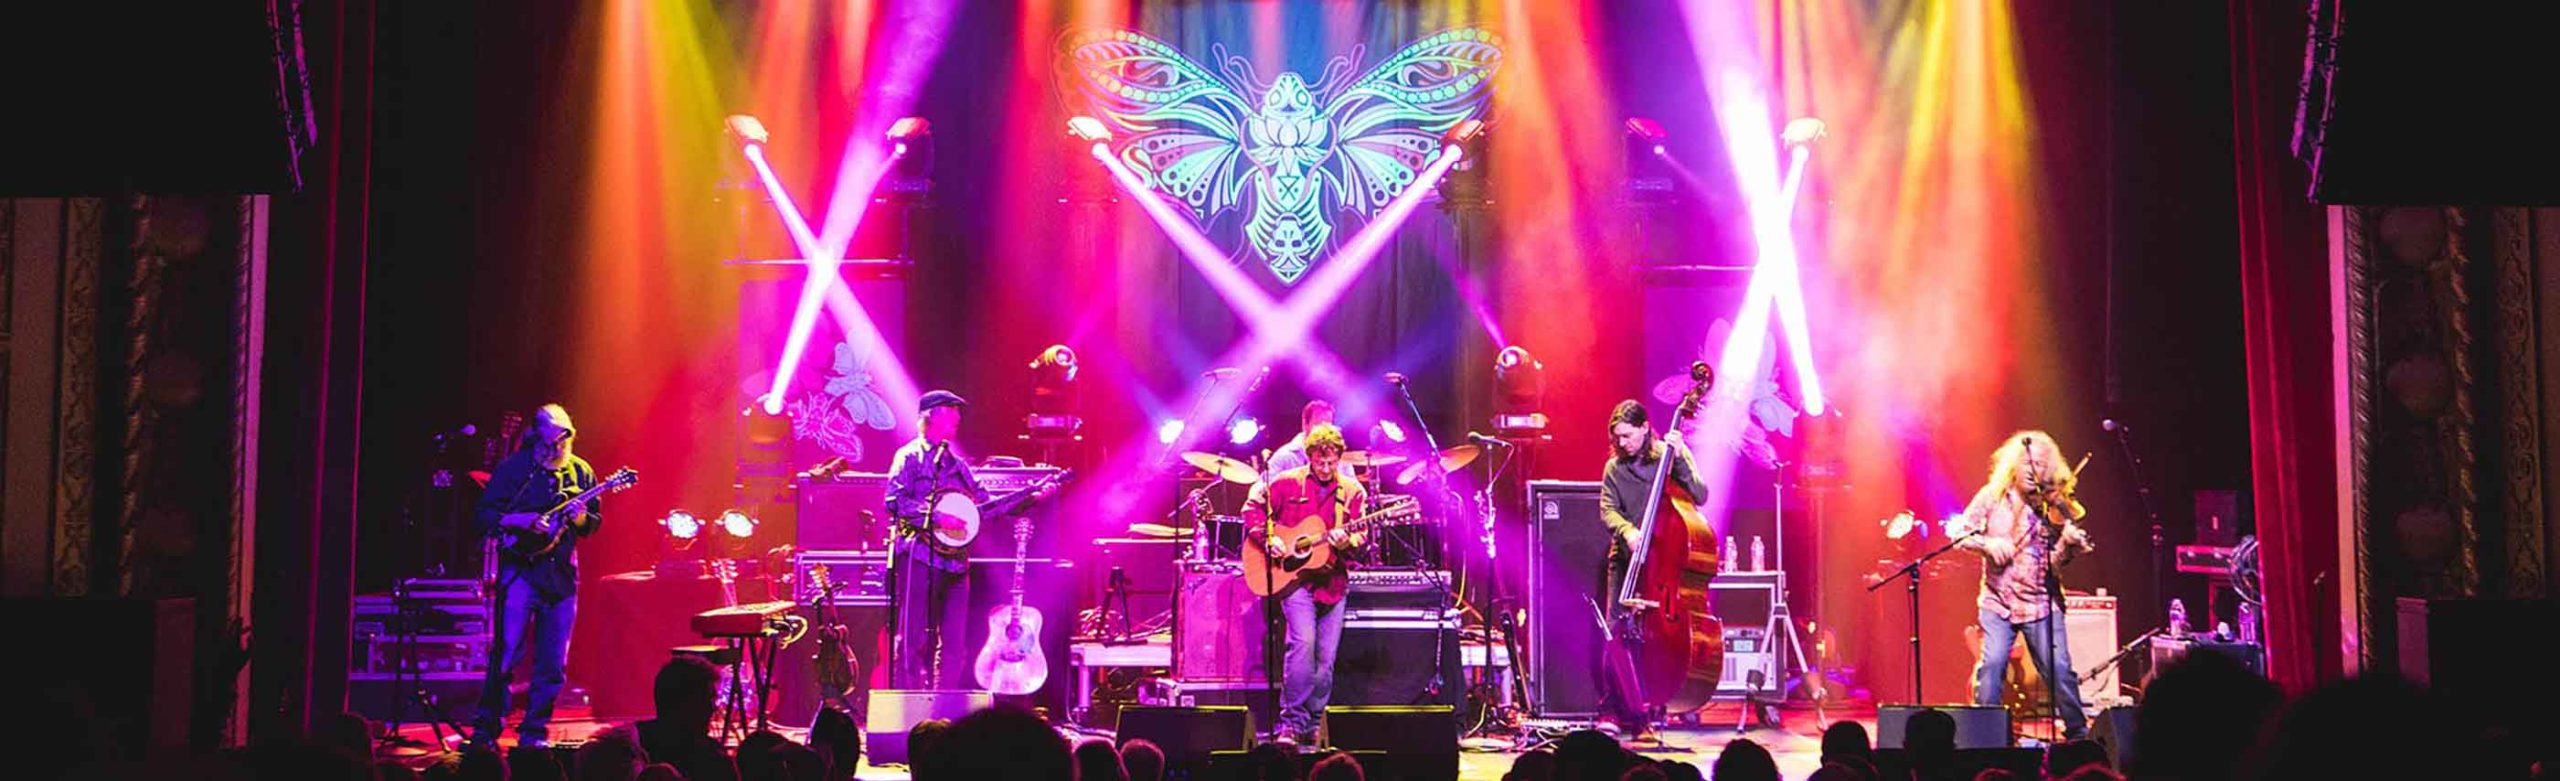 Railroad Earth’s Spirit Warms The Wilma (Photo/Review) Image